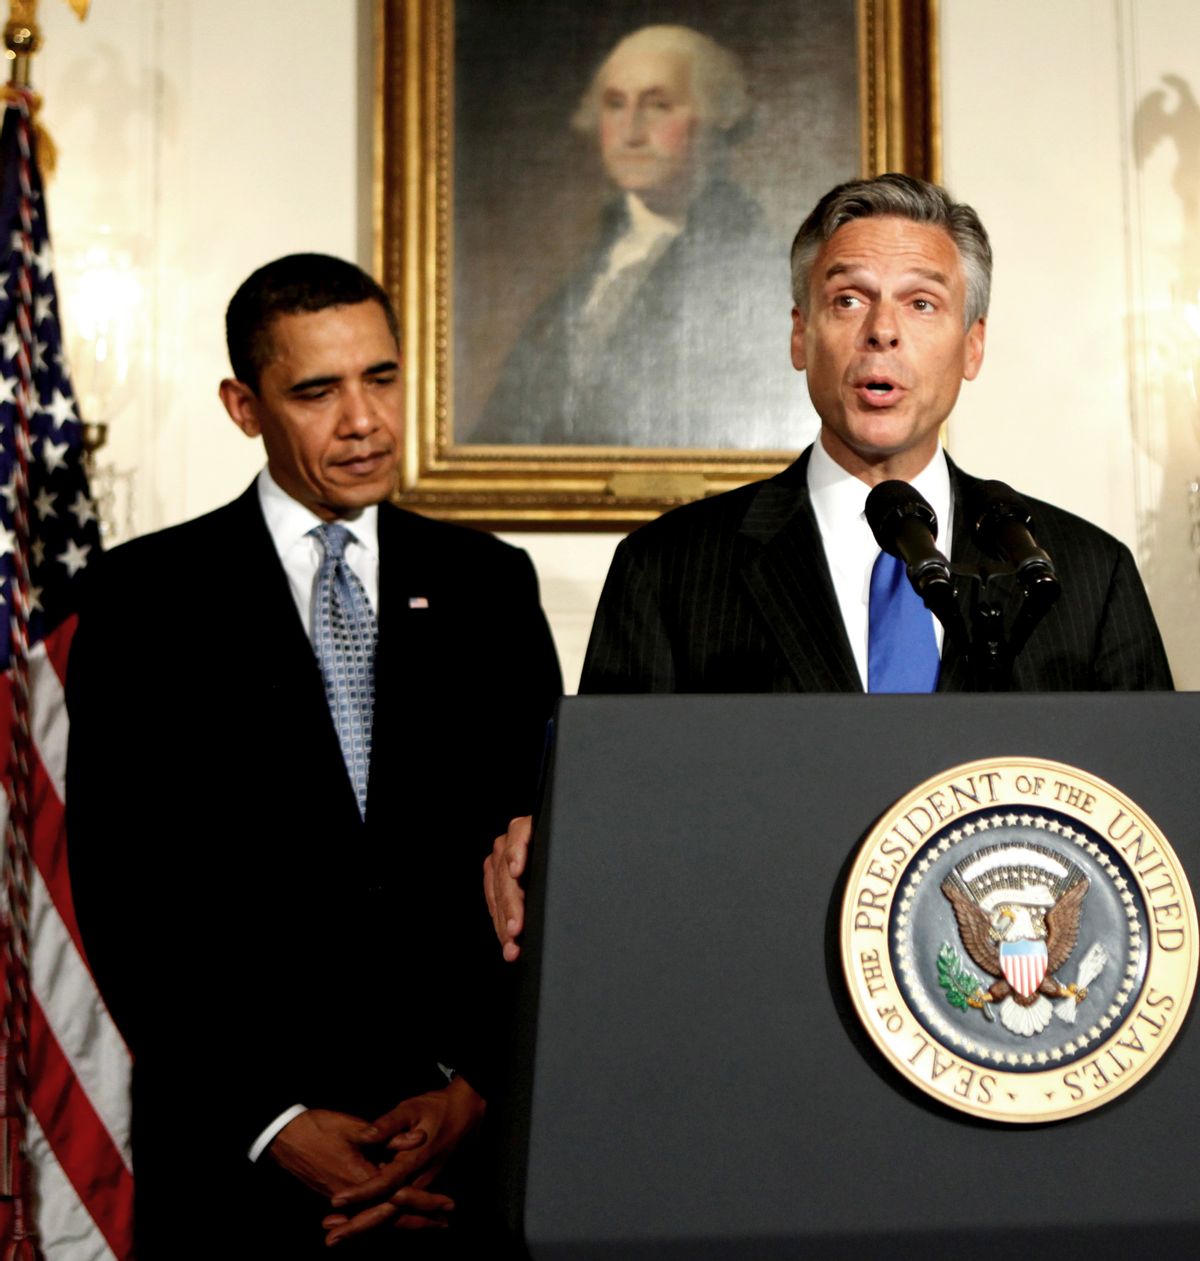 FILE - In this May 16, 2009 file photo, then-Utah Governor Jon Huntsman gives his acceptance remarks after his nomination by President Barack Obama as ambassador to China, in the Diplomatic Room at the White House in Washington. President Barack Obama pledged to bring change to Washington, but he is continuing one of the capital's most entrenched traditions: rewarding political supporters with ambassadorships. (AP Photo/Manuel Balce Ceneta, FILE) (Associated Press)